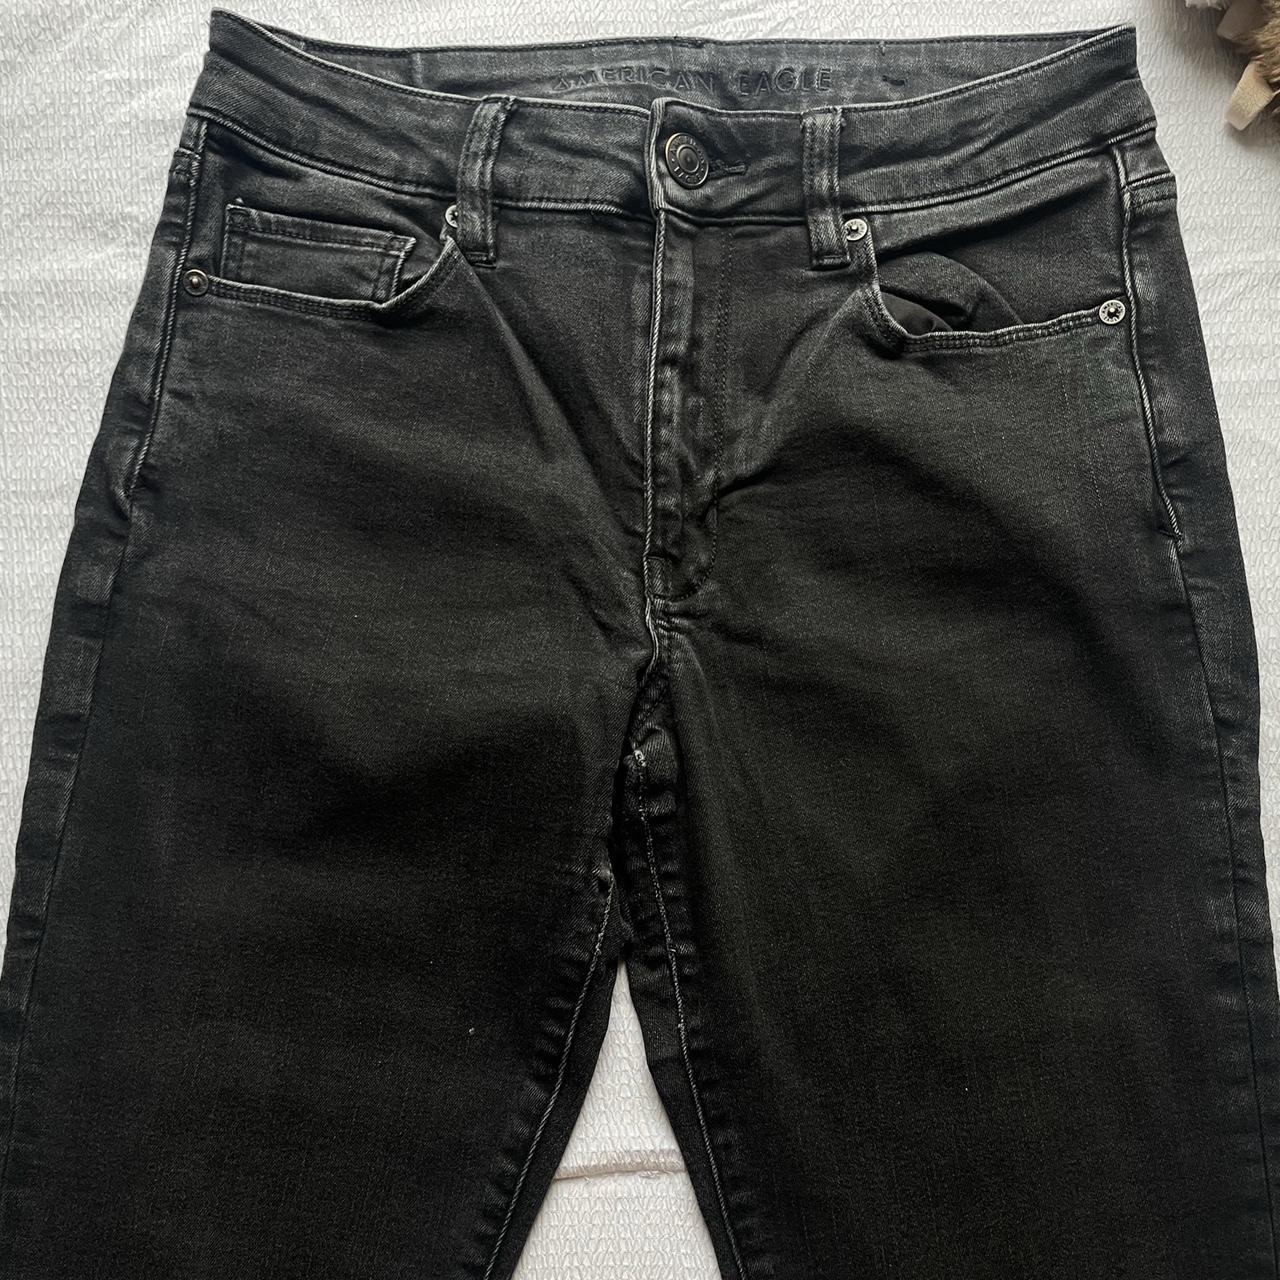 American eagle outfitter skinny jeans in black... - Depop